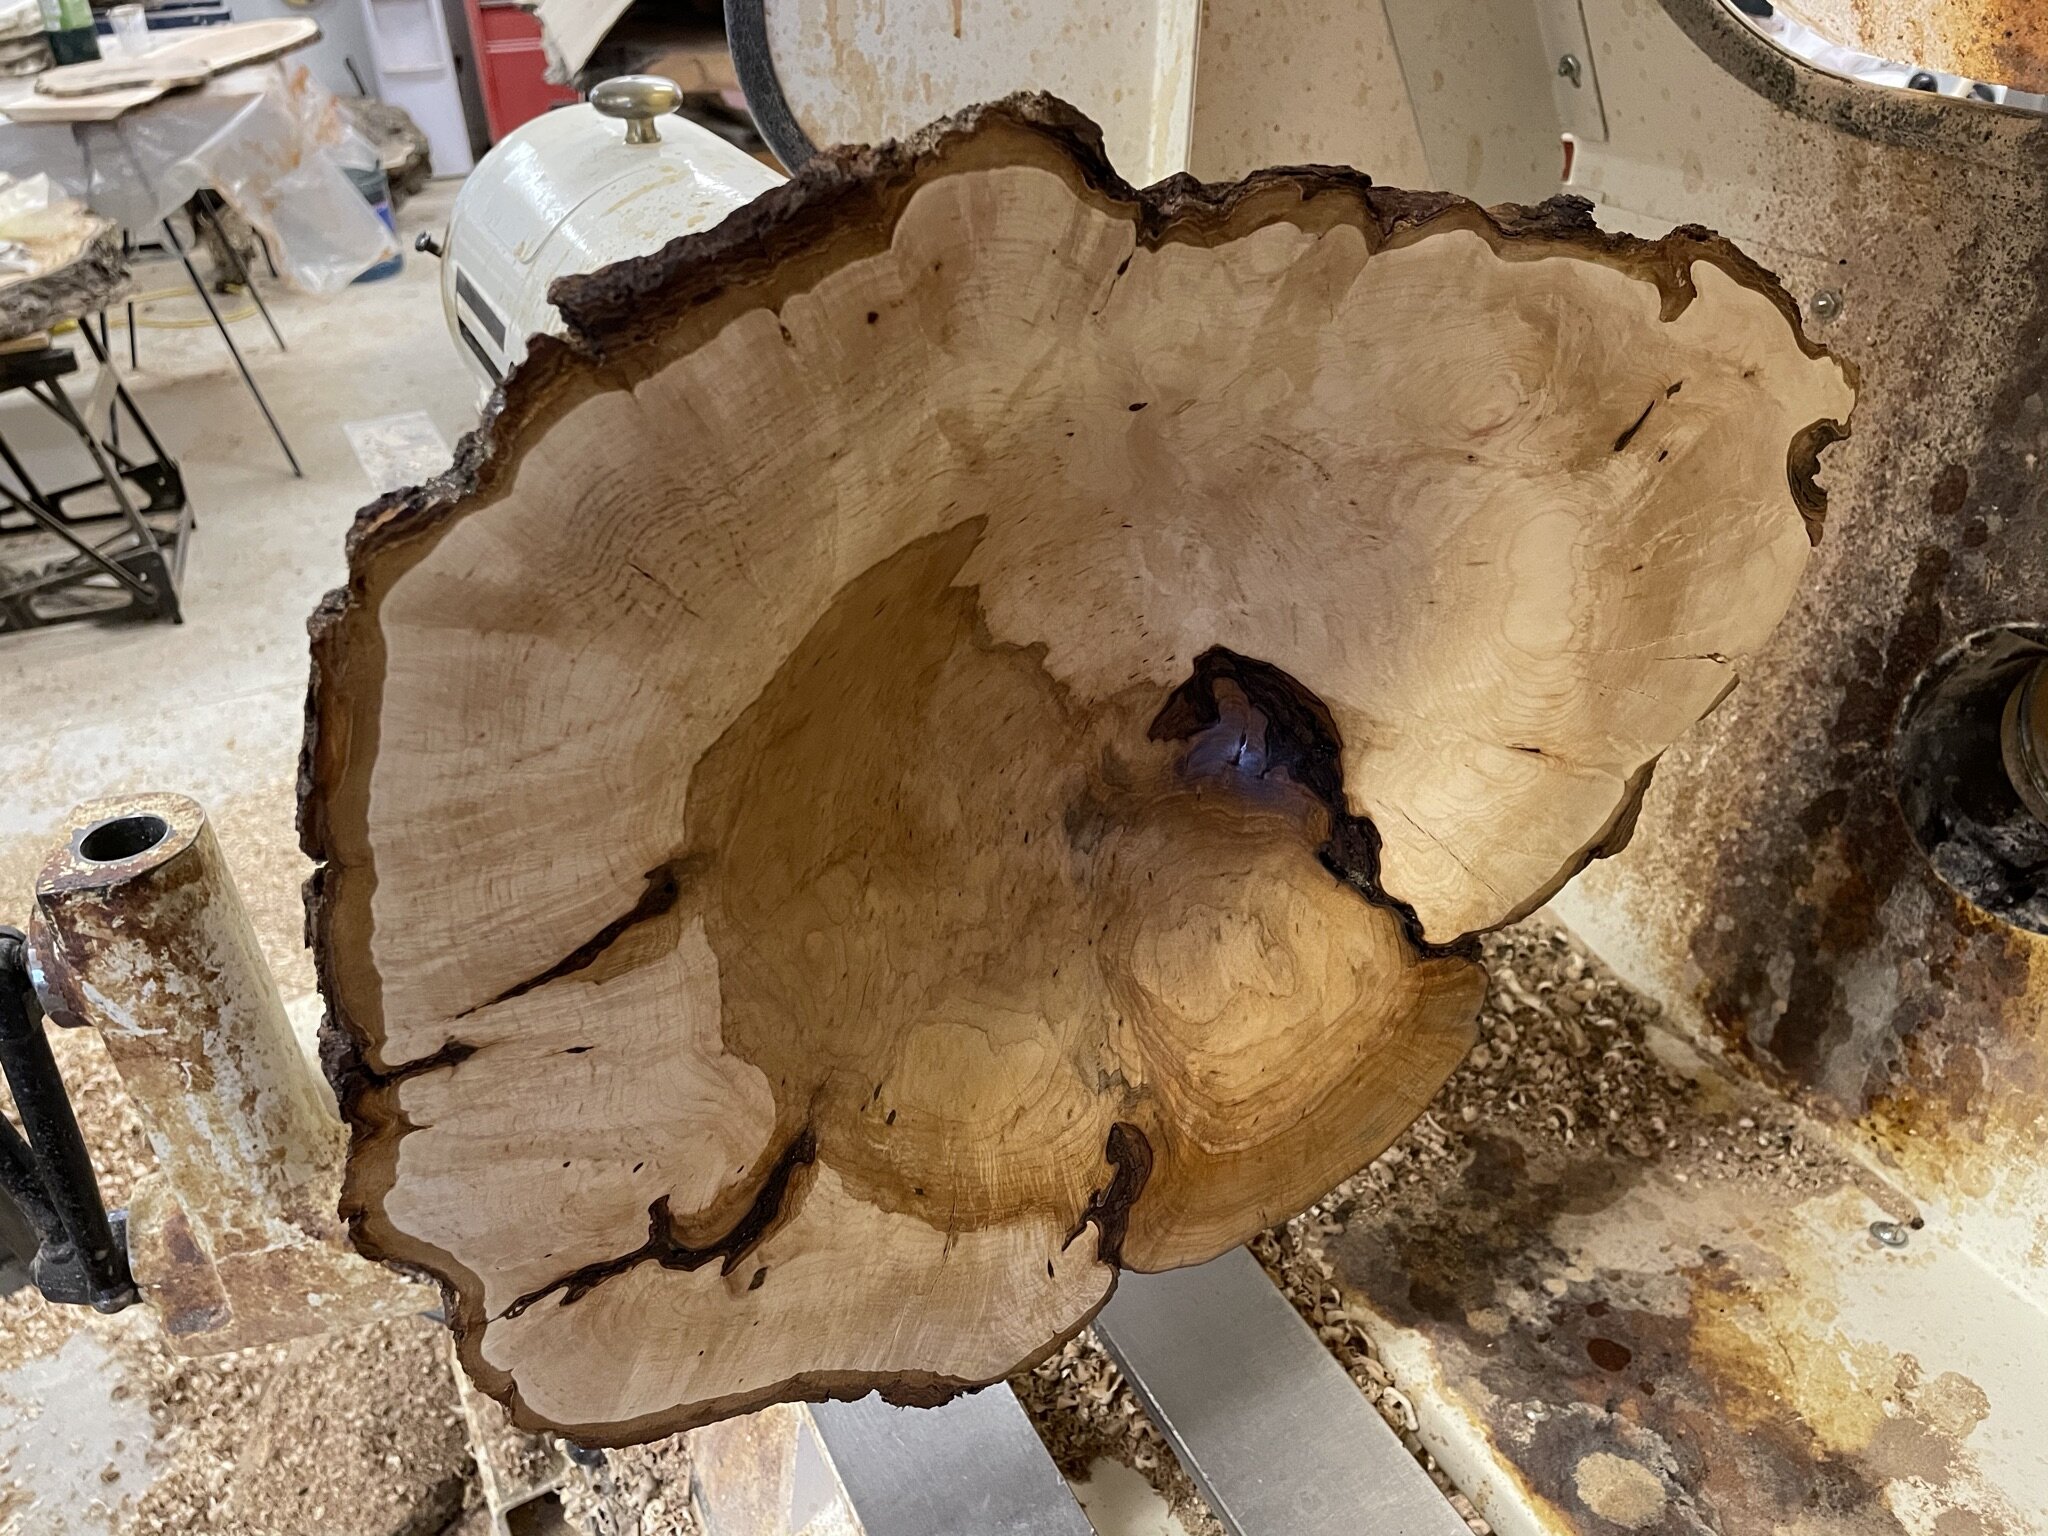  This Sugar Maple Burl on the lathe has dramatic colours and bark inclusions.  